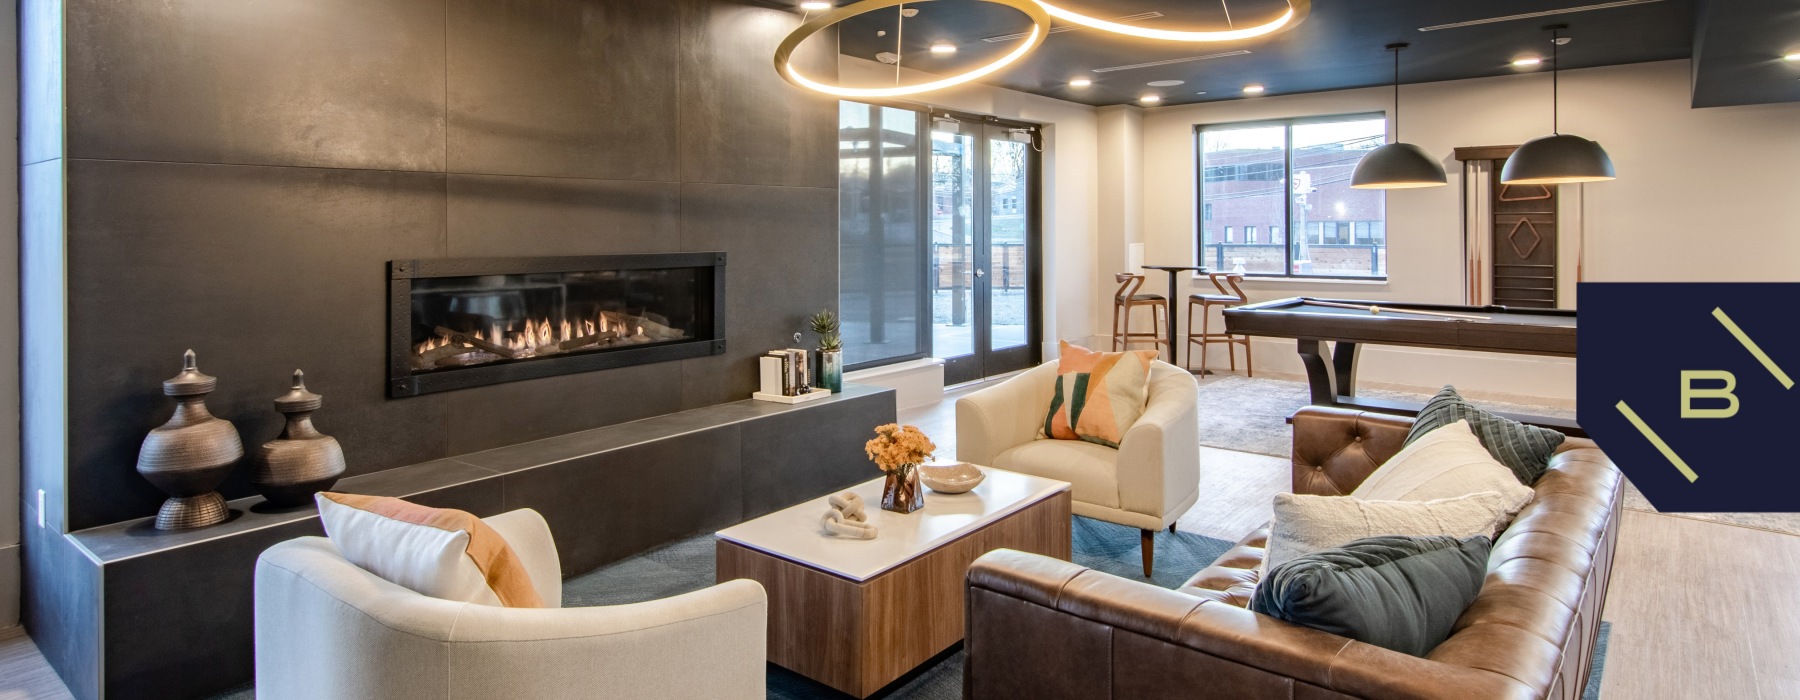 lounge with seating, fireplace and billiards - the beam new london ct luxury apartments